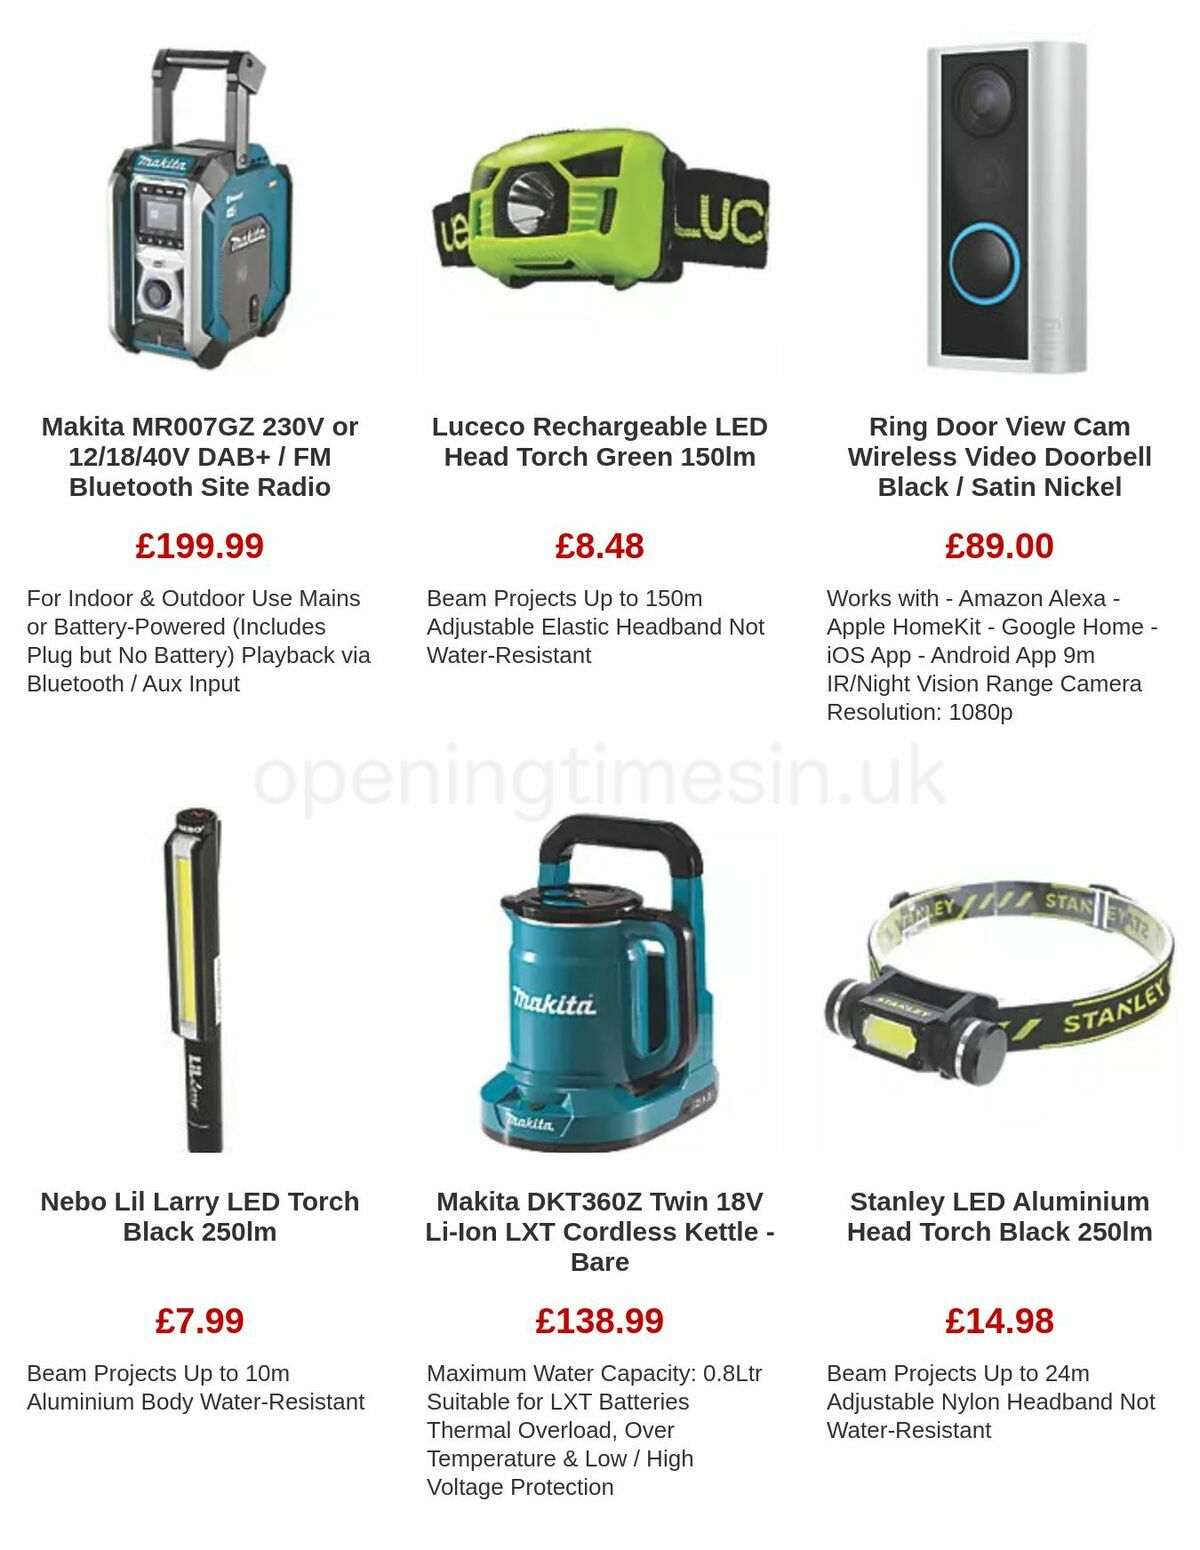 Screwfix Offers from 4 December